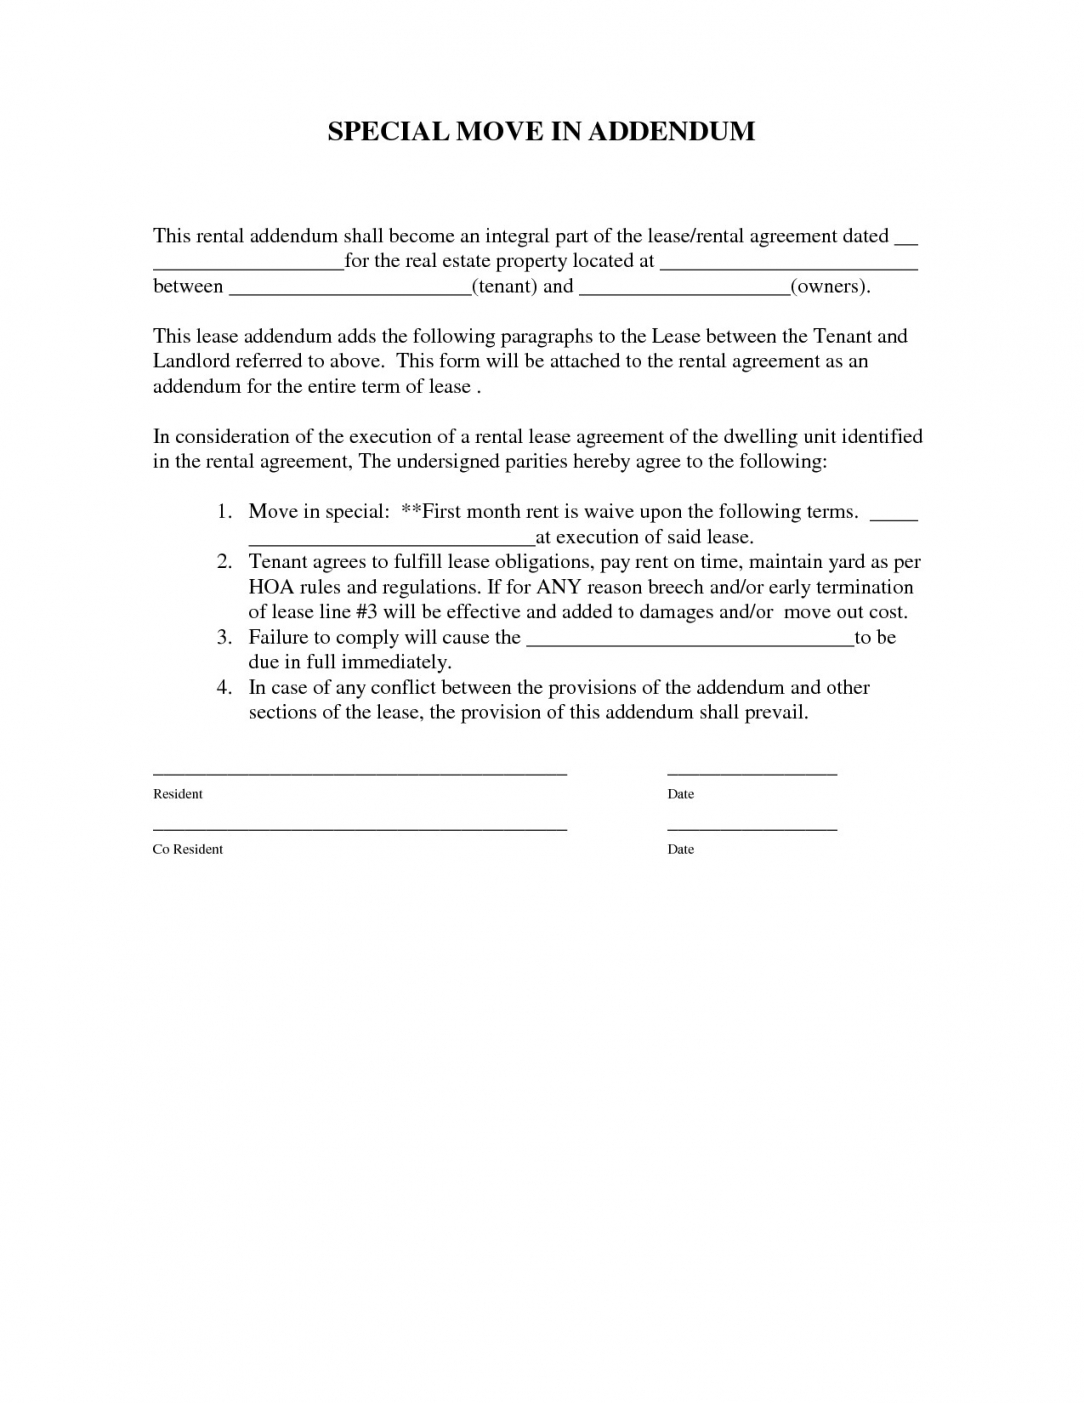 Addendum To Lease Agreement Template – The Best Agreement Of 2018 